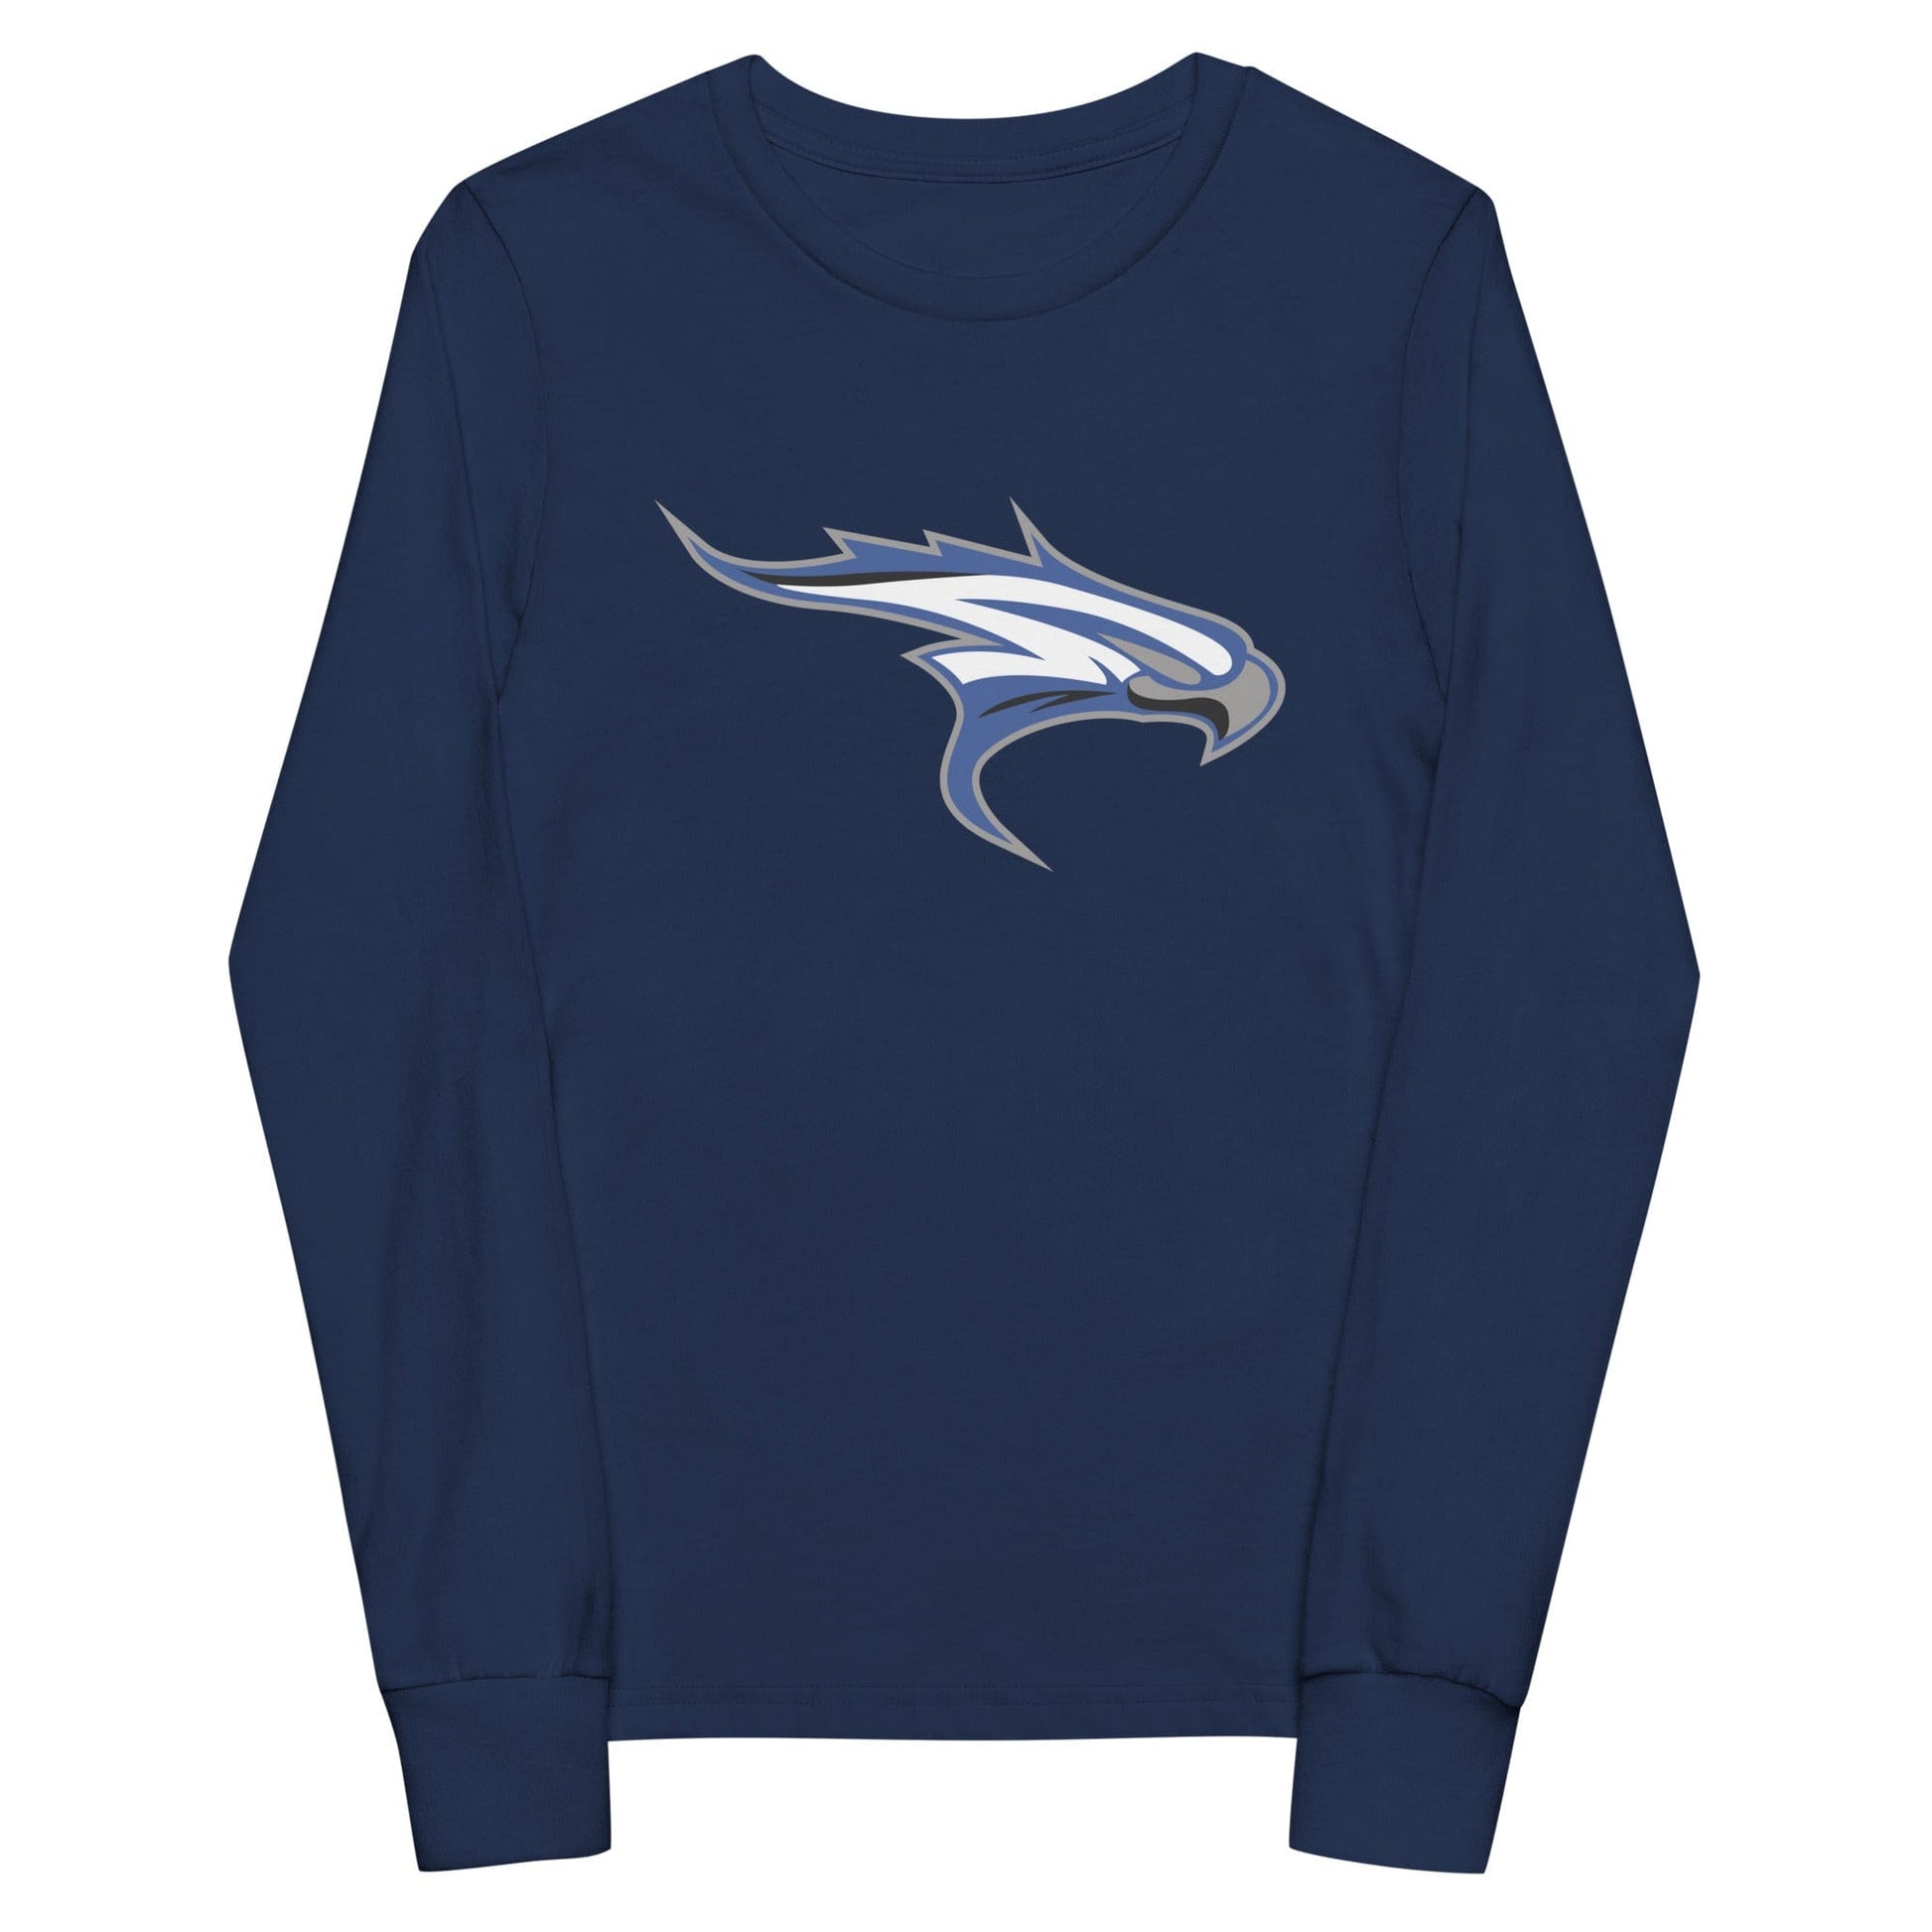 Highlands Ranch Lacrosse Youth Cotton Long Sleeve T-Shirt Signature Lacrosse